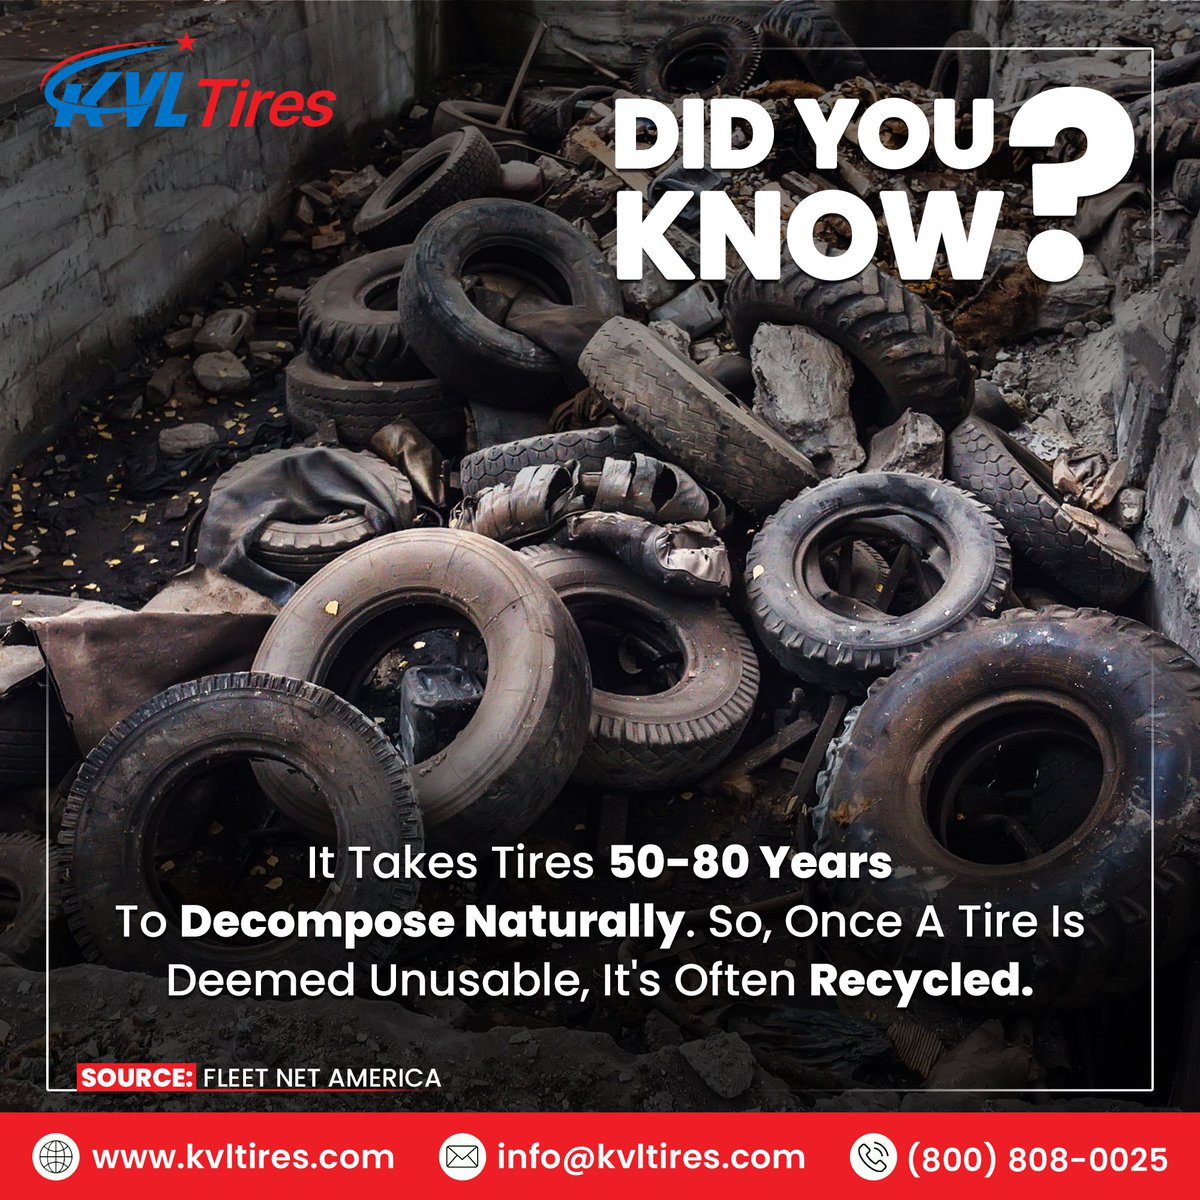 Used tires can be recycled into tons of cool stuff, from swing sets to running tracks. ♻️ If you need help finding a home for your old tires, reach out to KVL Tires we'd be glad to help!
#kvltires #didyouknow #recycle #oldtires #usedtires #reuse #automobile #truckersusa